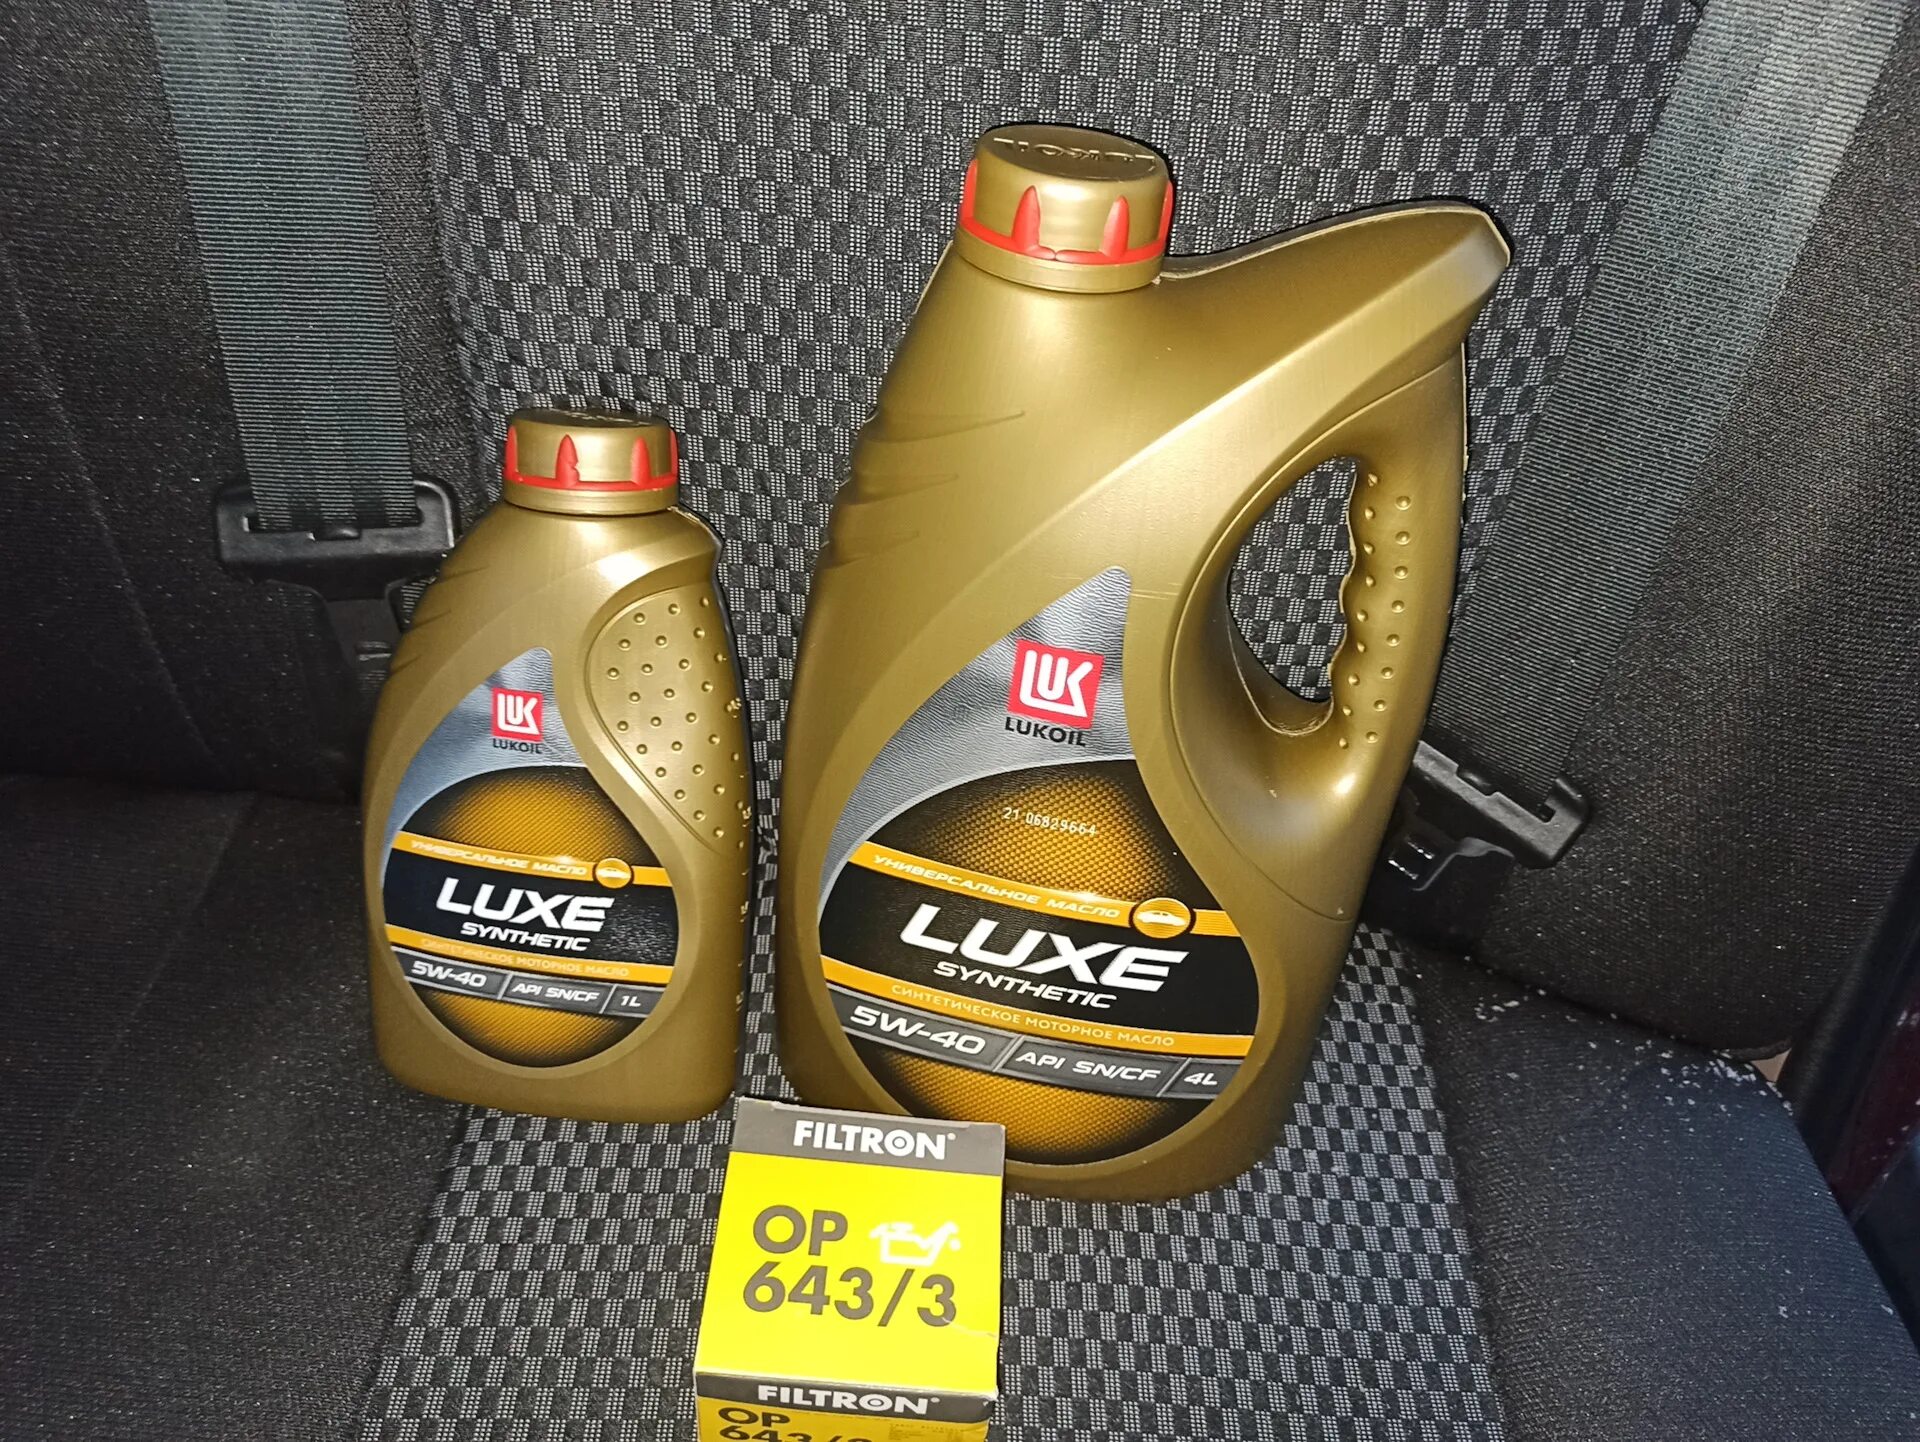 Лукойл Люкс 5w40 SN/CF. Рено Логан 1 1.6 Lukoil Luxe. Масло Лукойл Люкс 5w40 в Рено Логан 2. Масло моторное 5w40 для Рено Логан. Моторное масло логан 1.4